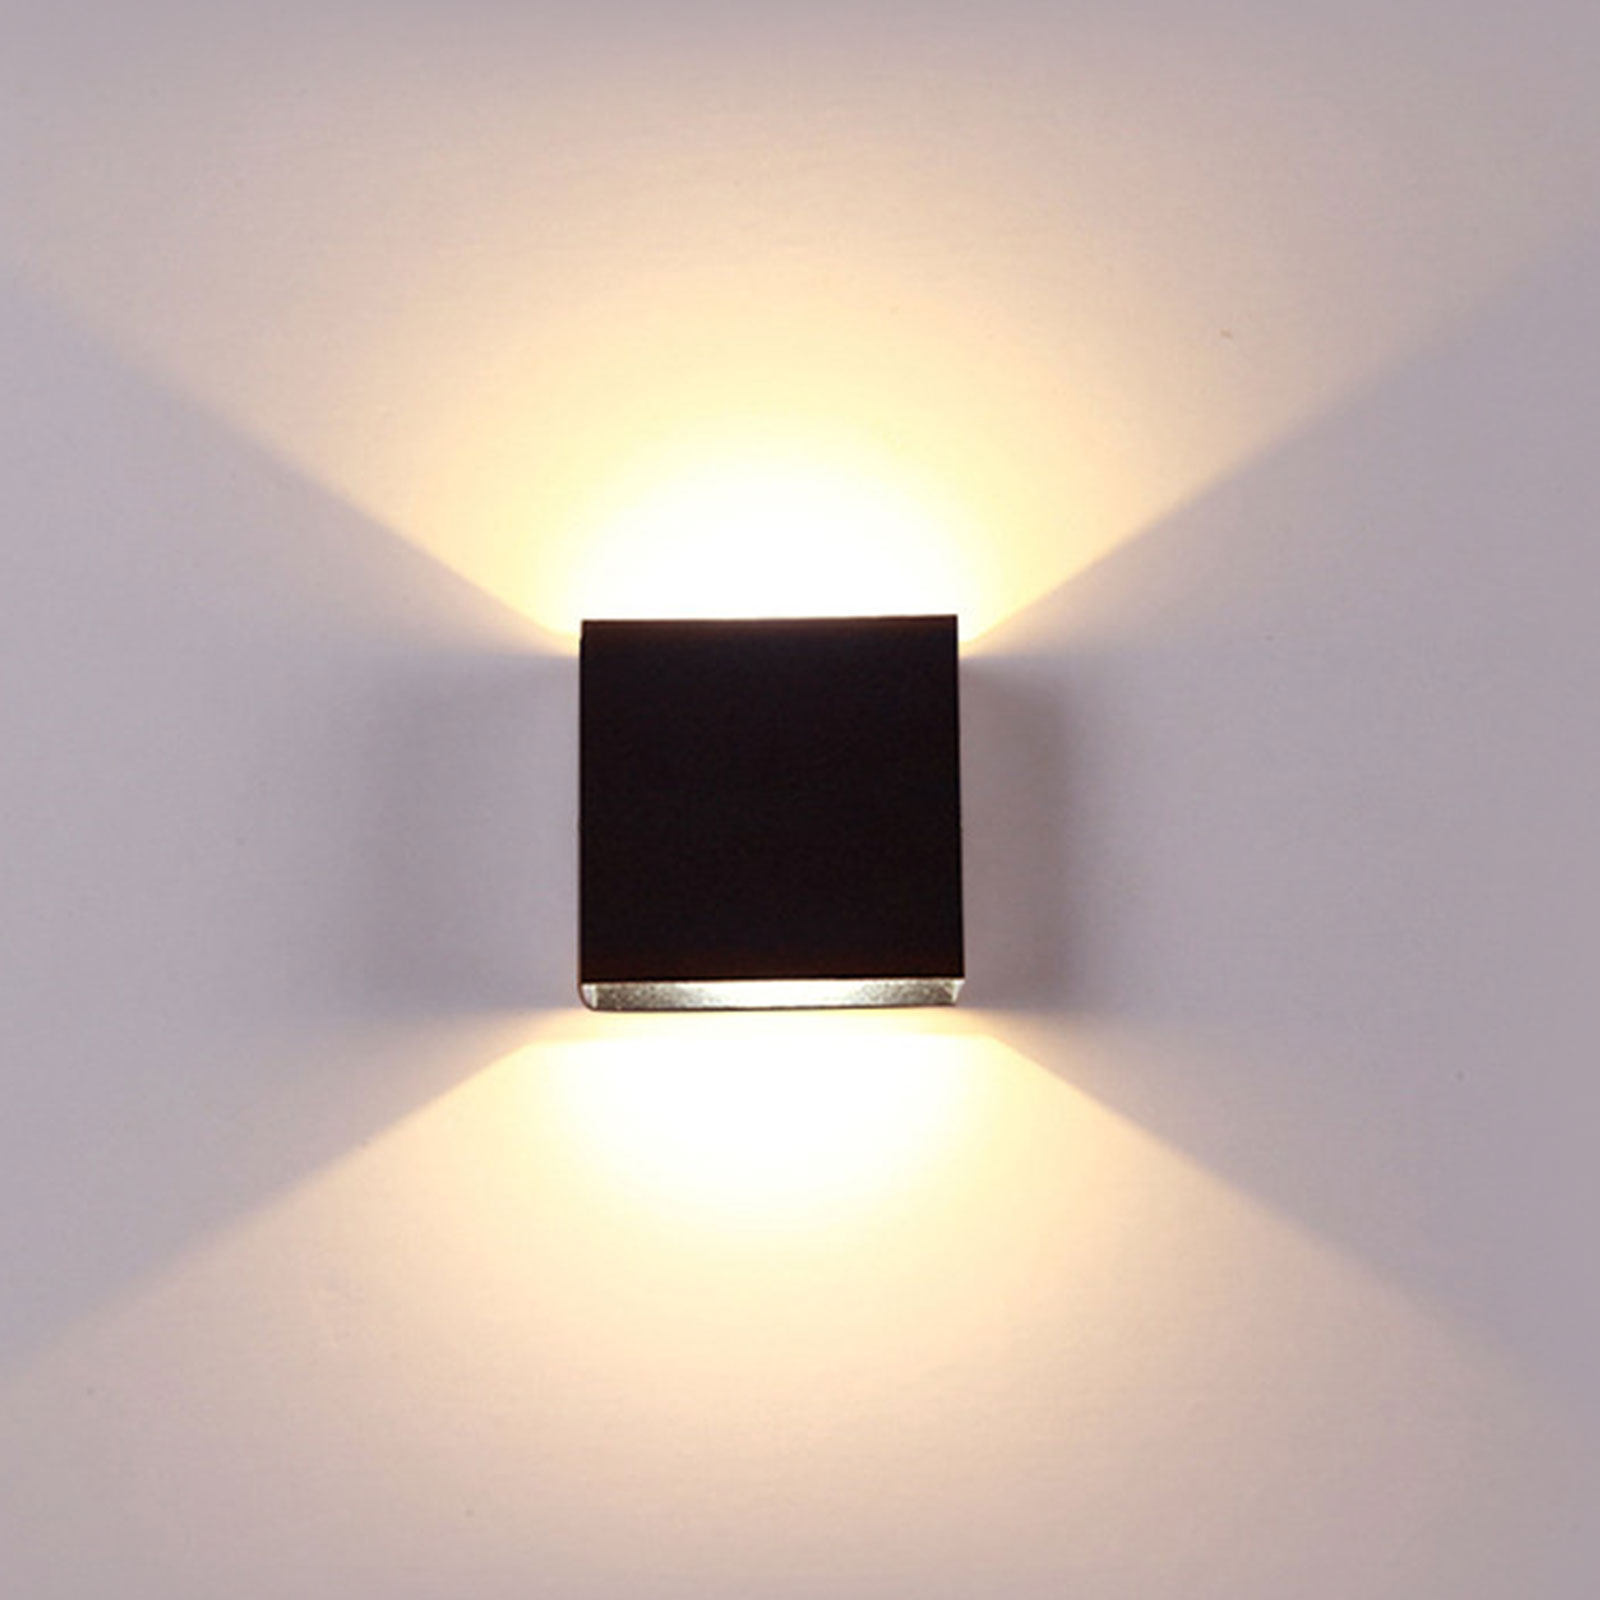 Cube LED Wall Light Modern Up Down Sconce Lighting Fixture Lamps Outdoor Indoor 